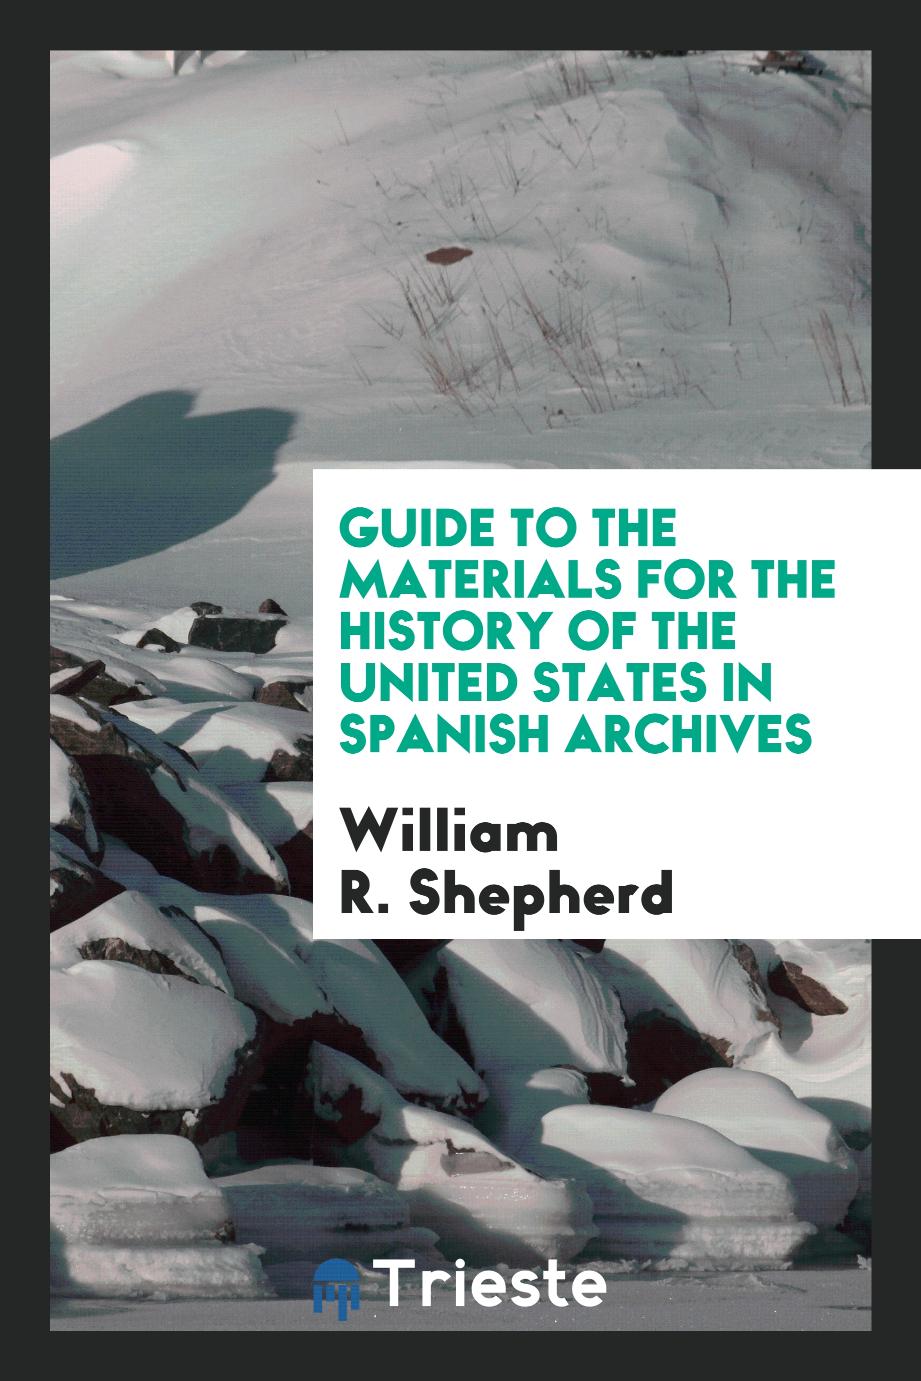 Guide to the materials for the history of the United States in Spanish archives